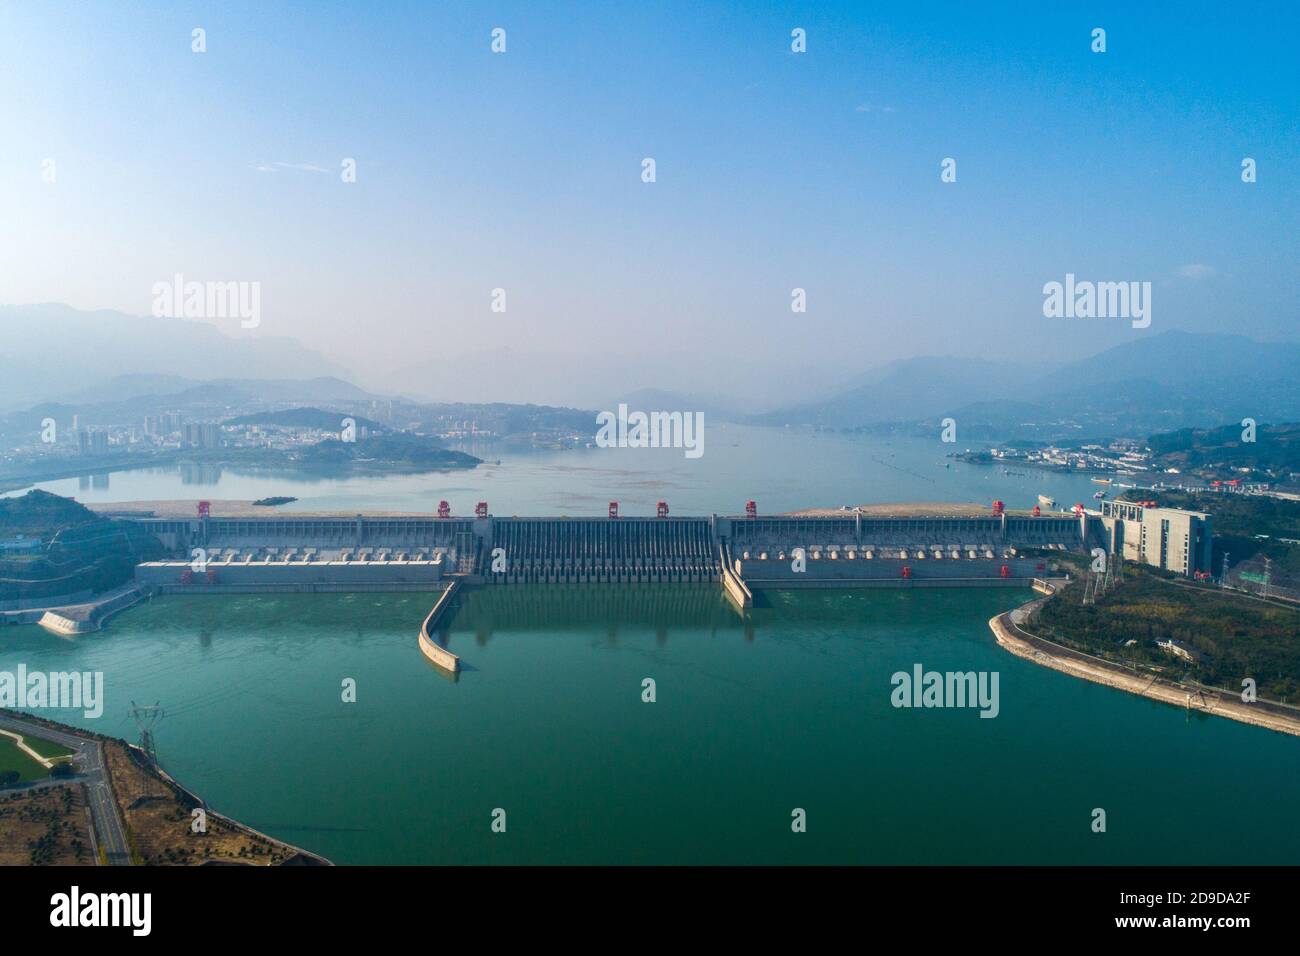 An aerial view of the Three Gorges Dam storing water to make the water levl reach the 175 meters, Yichang city, central China’s Hubei province, 26 Oct Stock Photo